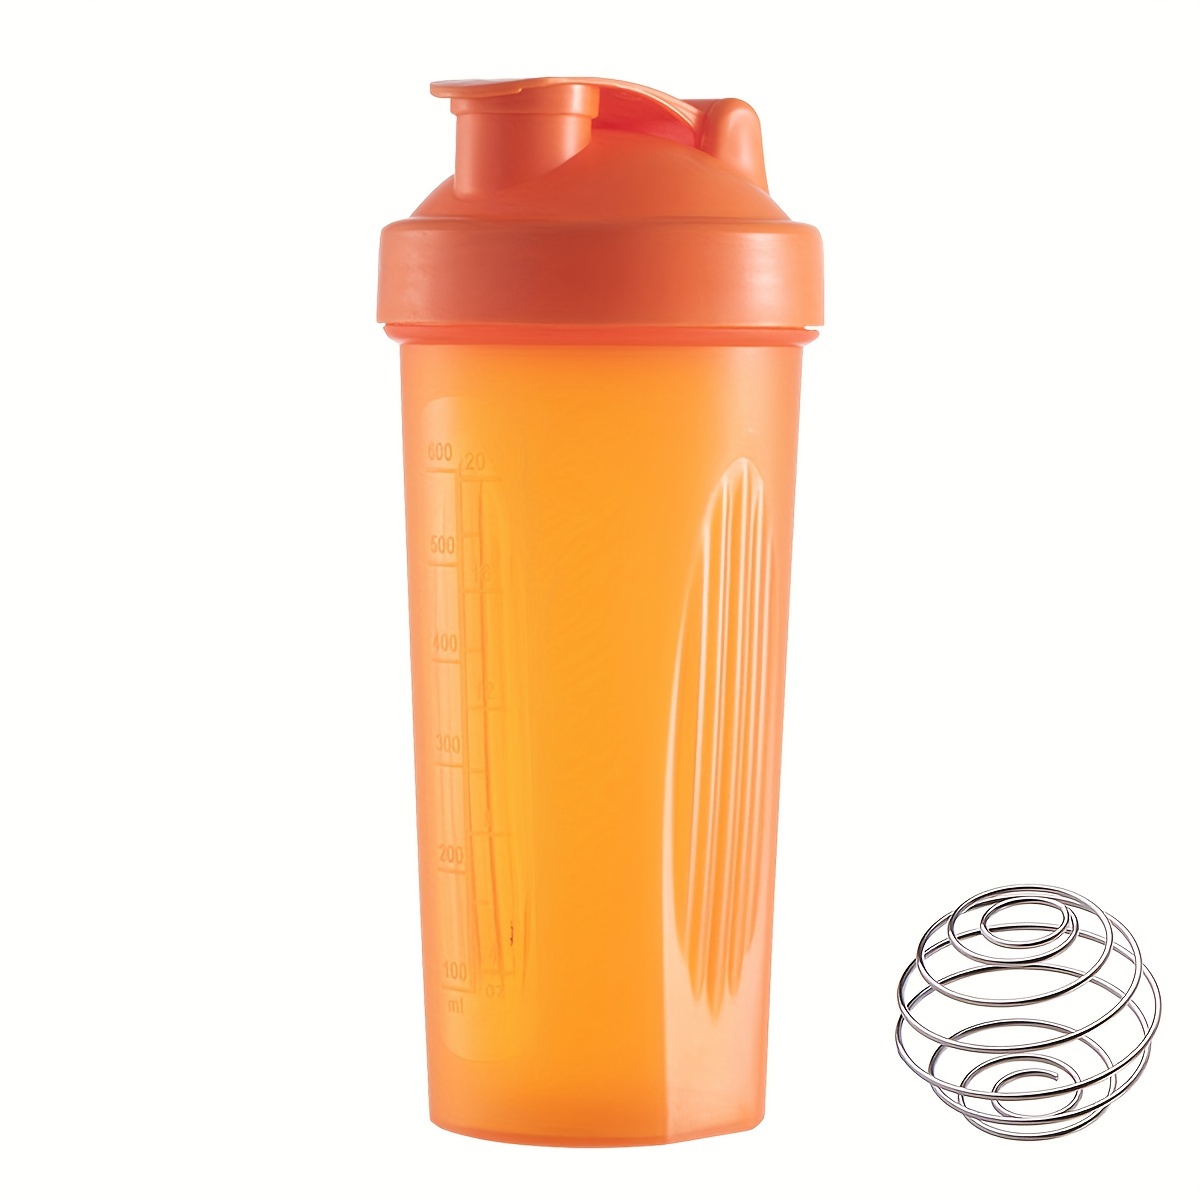 2 Pack TSF 25 oz. Stainless Steel Protein Workout Powder Orange and Black  Mixer Shaker Cup Bottle 